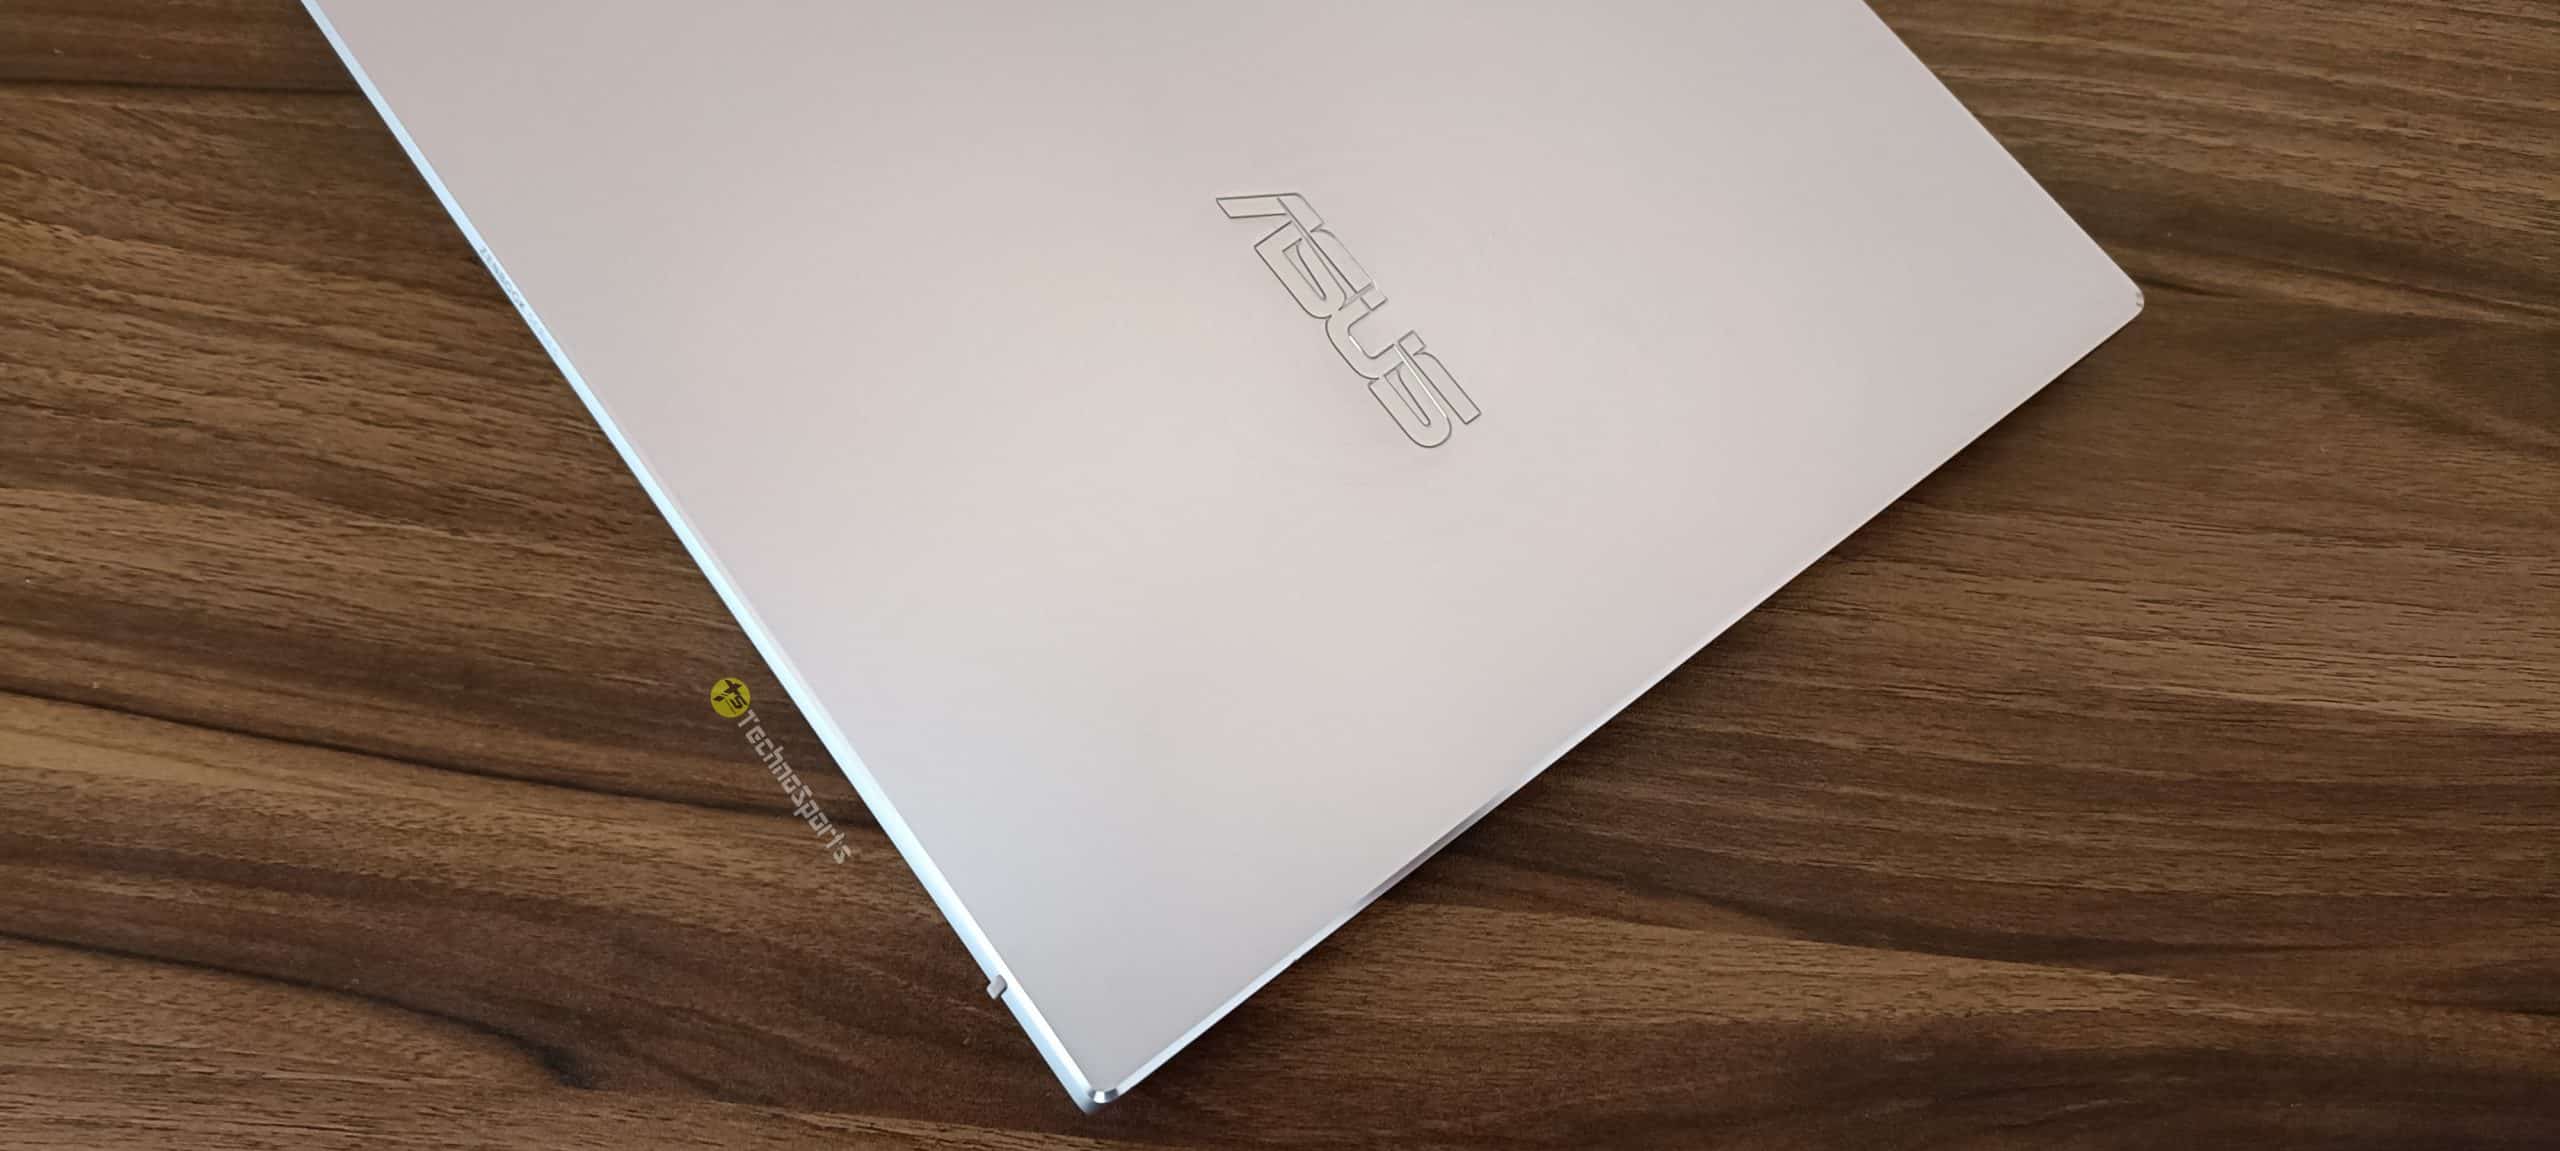 Asus Zenbook 14 Review - 22_TechnoSports.co.in